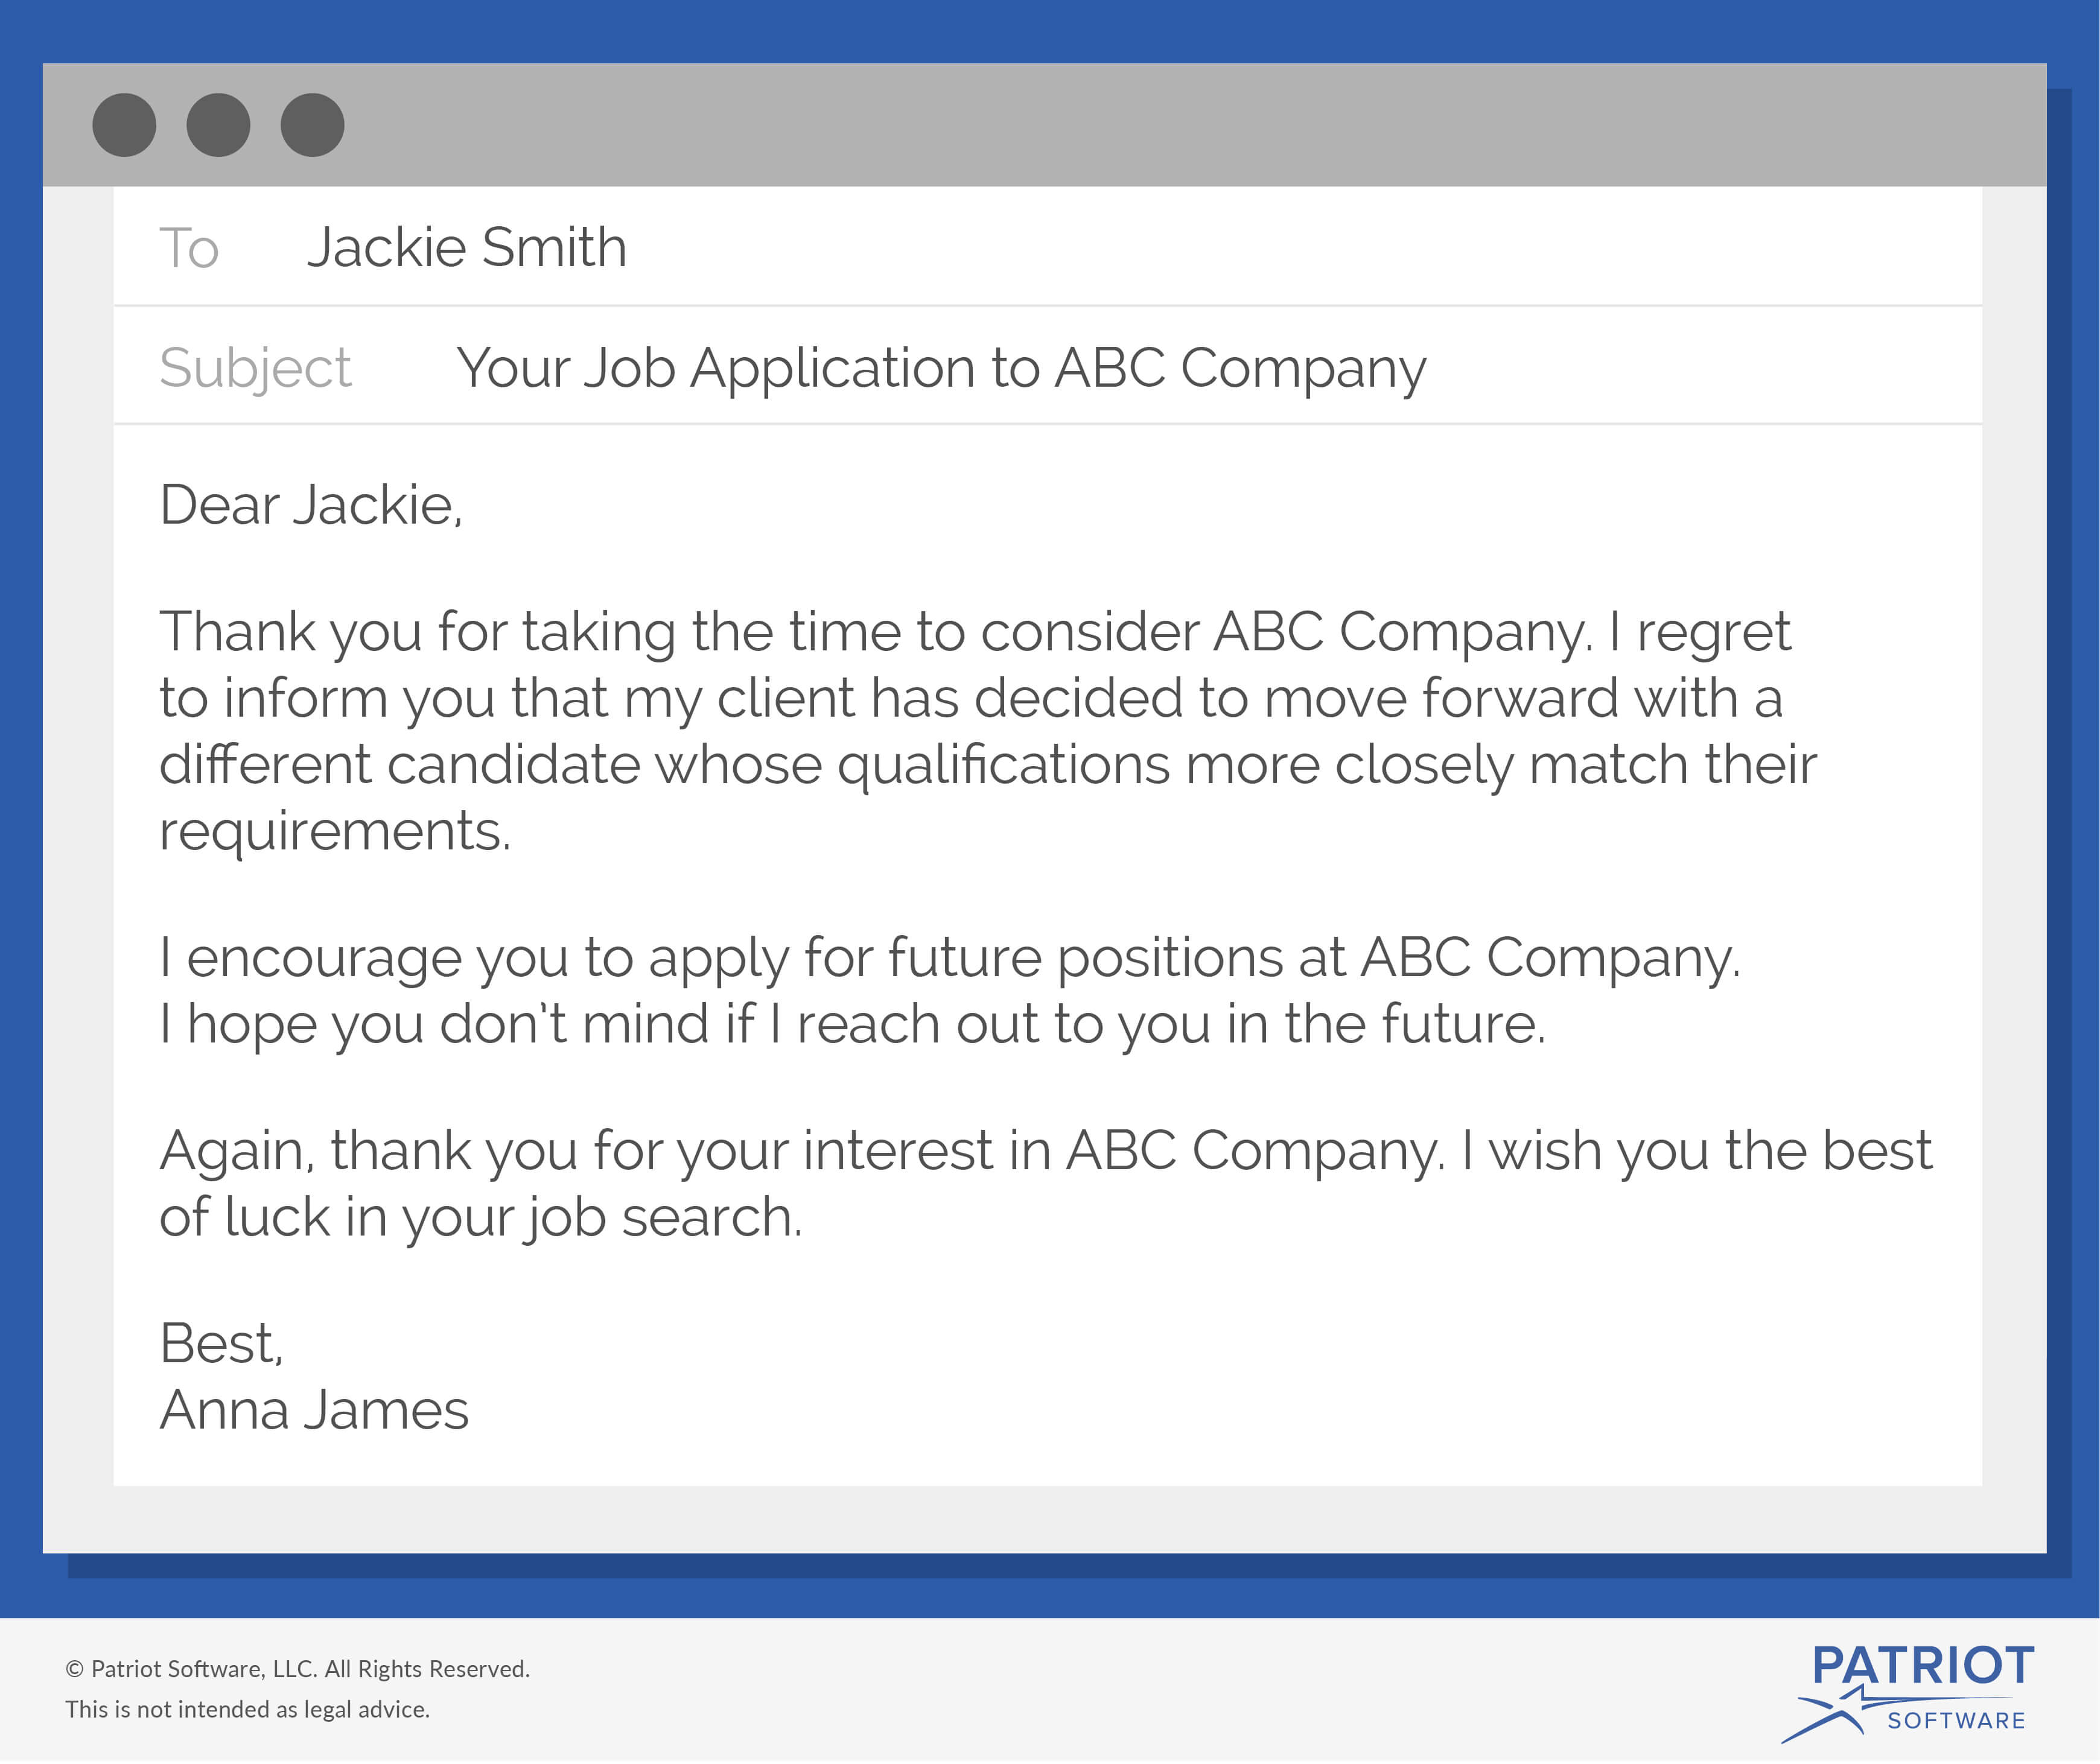 7 Email Templates for Your Next Job Application (Loved by Hiring Managers)